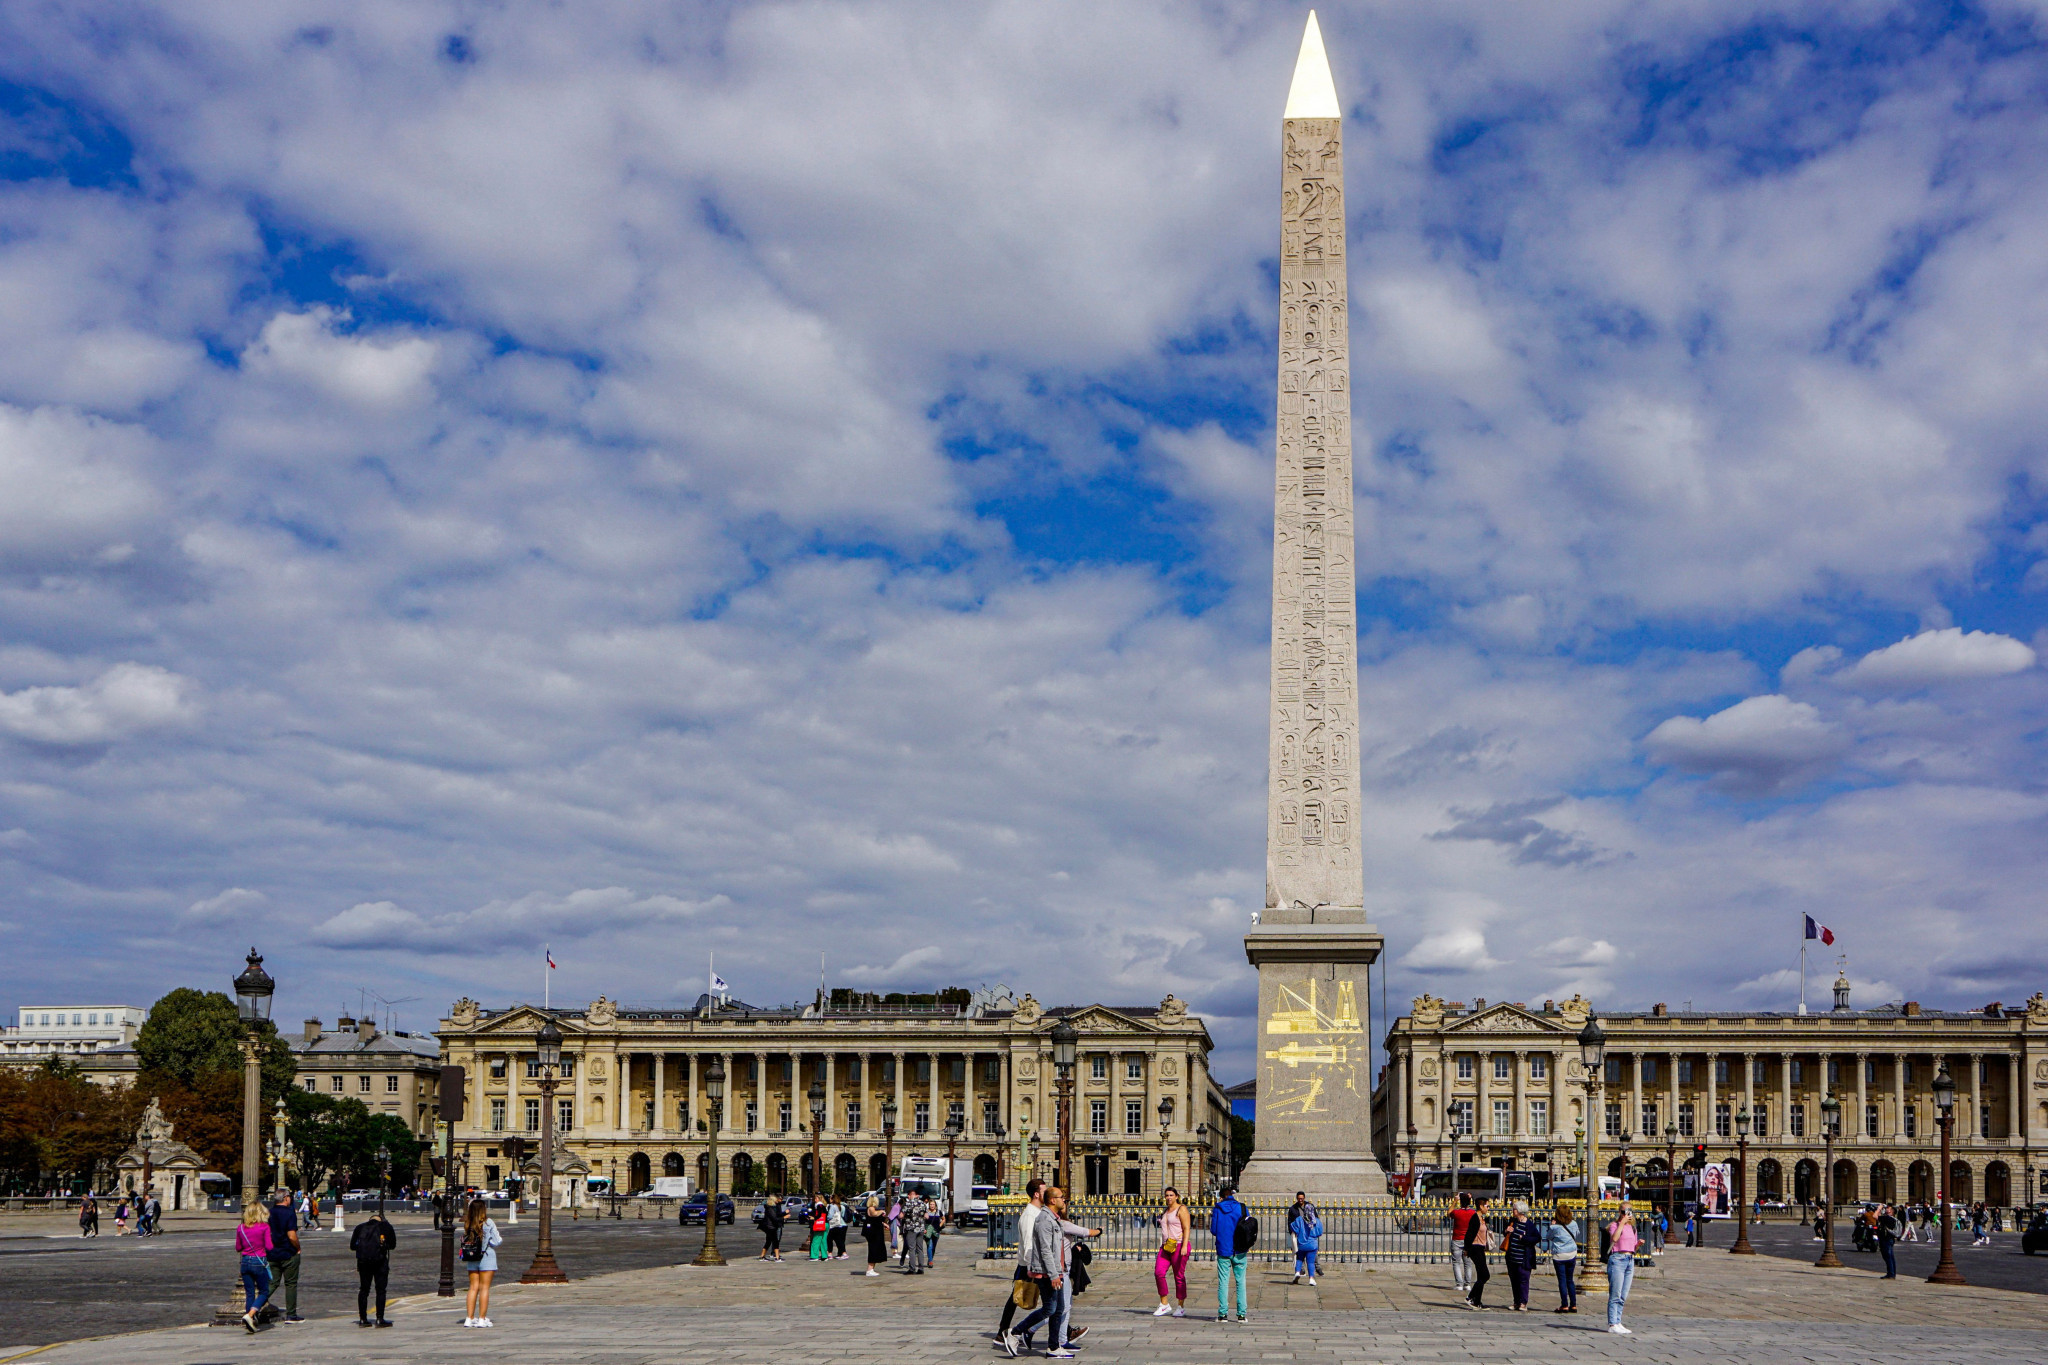 Breaking will be held at the Place de la Concorde at Paris 2024 ©Getty Images